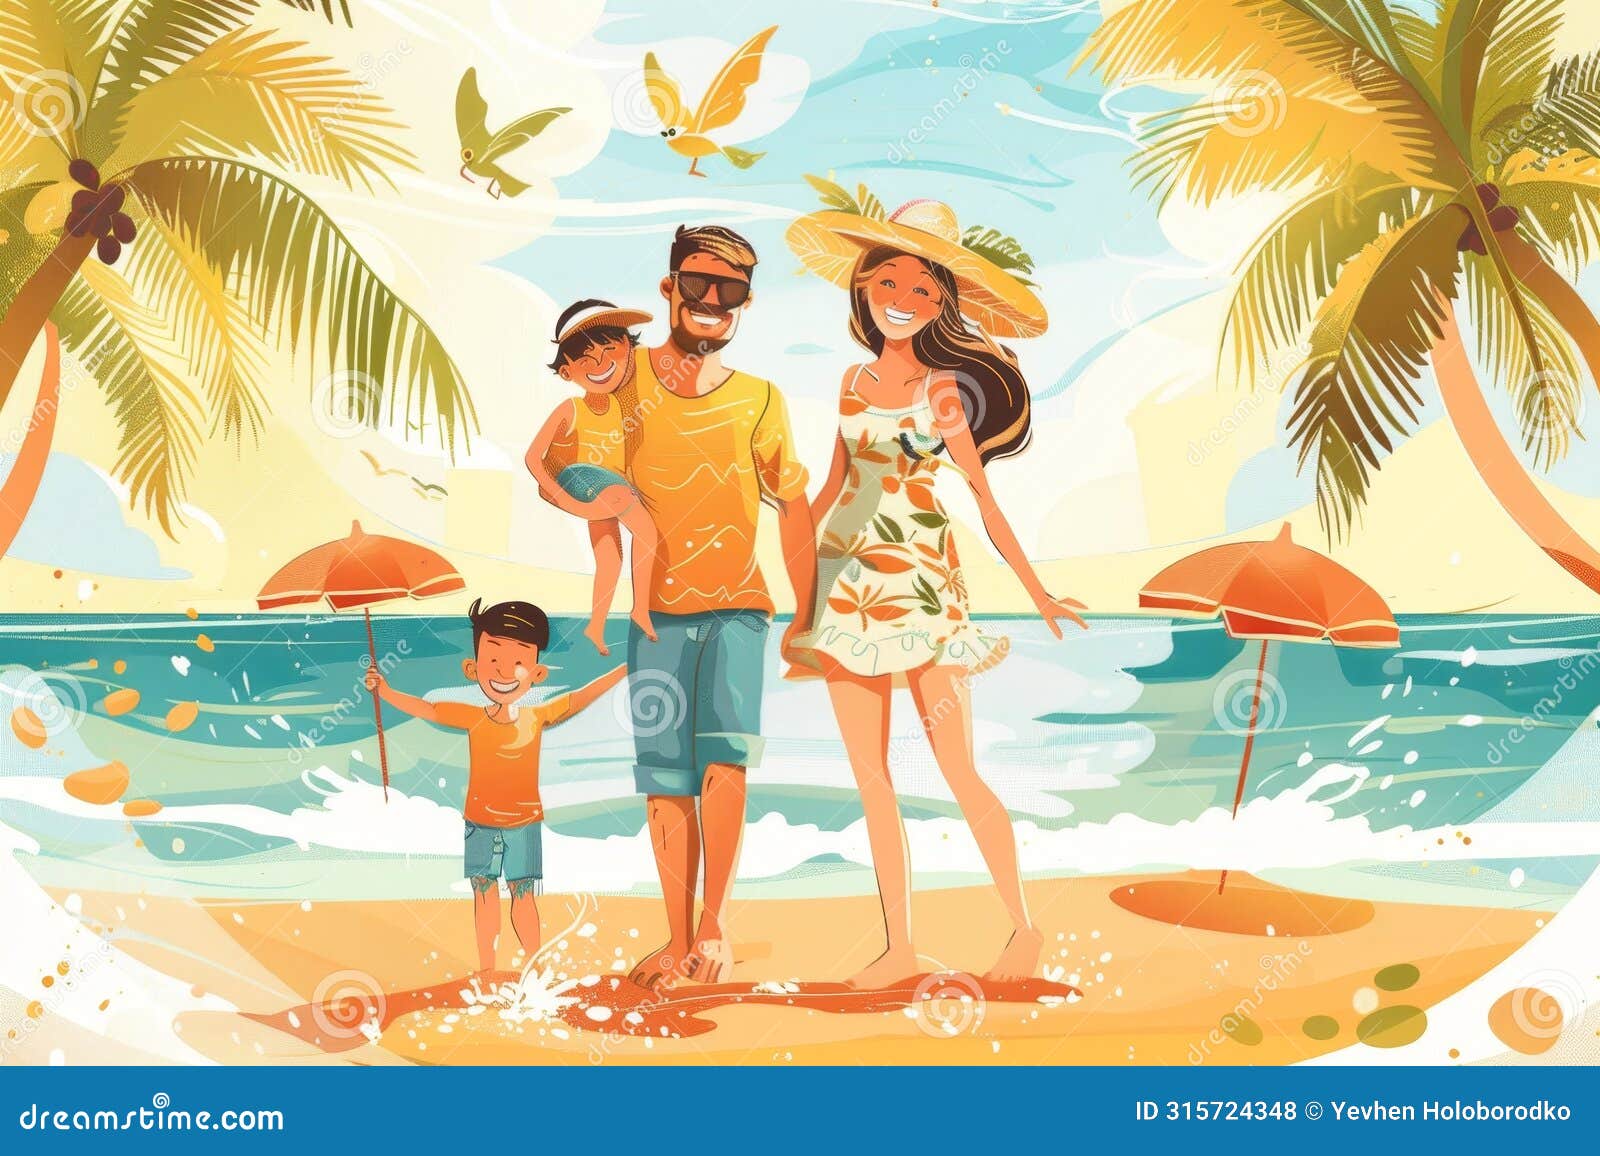  of happy family sitting together on the beach, captured in vibrant printmaking artistry